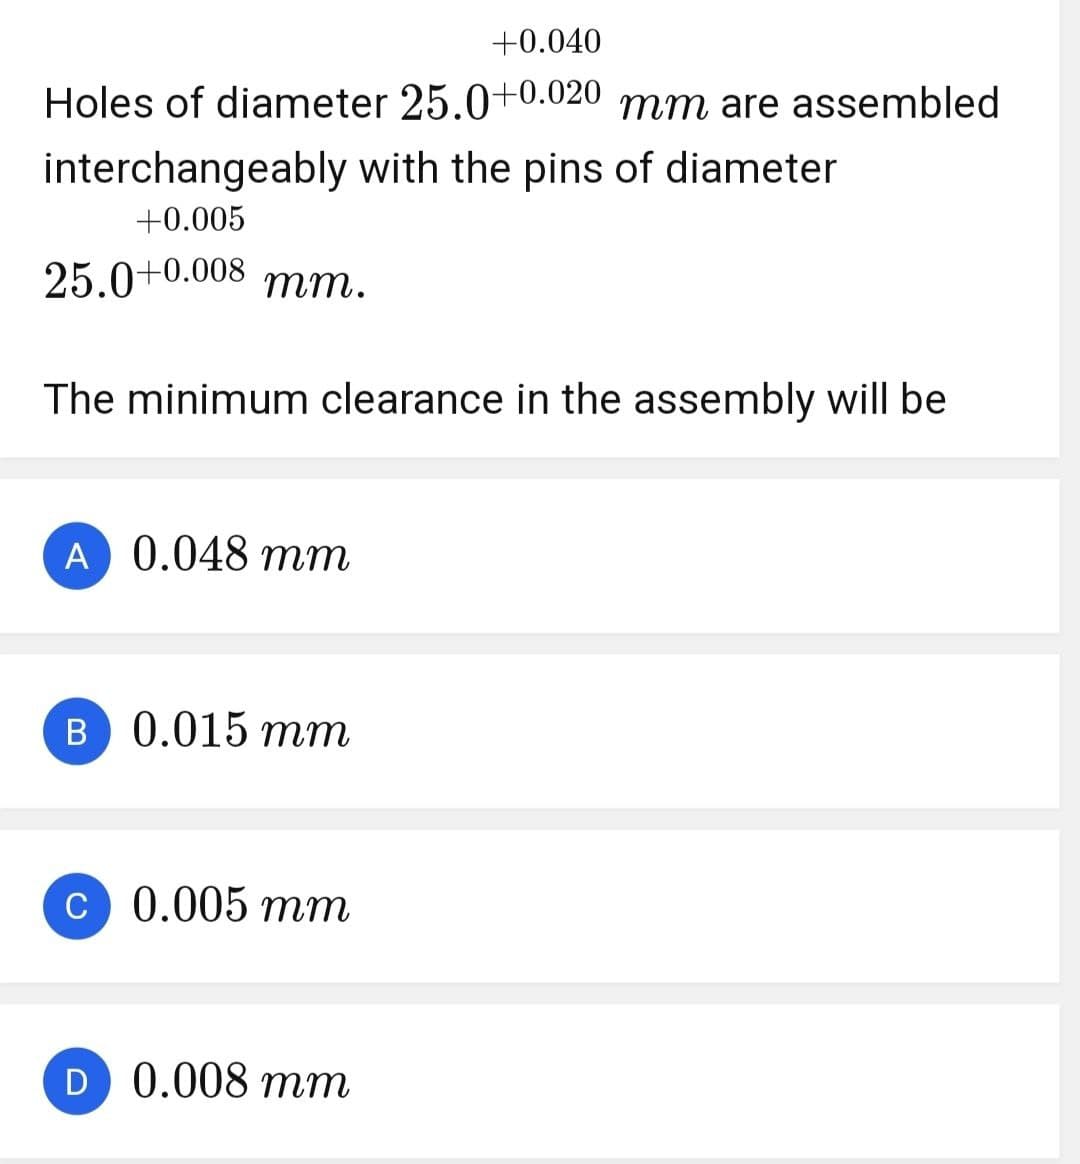 +0.040
Holes of diameter 25.0+0.020 mm are assembled
interchangeably with the pins of diameter
+0.005
25.0+0.008 mm.
The minimum clearance in the assembly will be
A 0.048 mm
B 0.015 mm
C 0.005 mm
D 0.008 mm